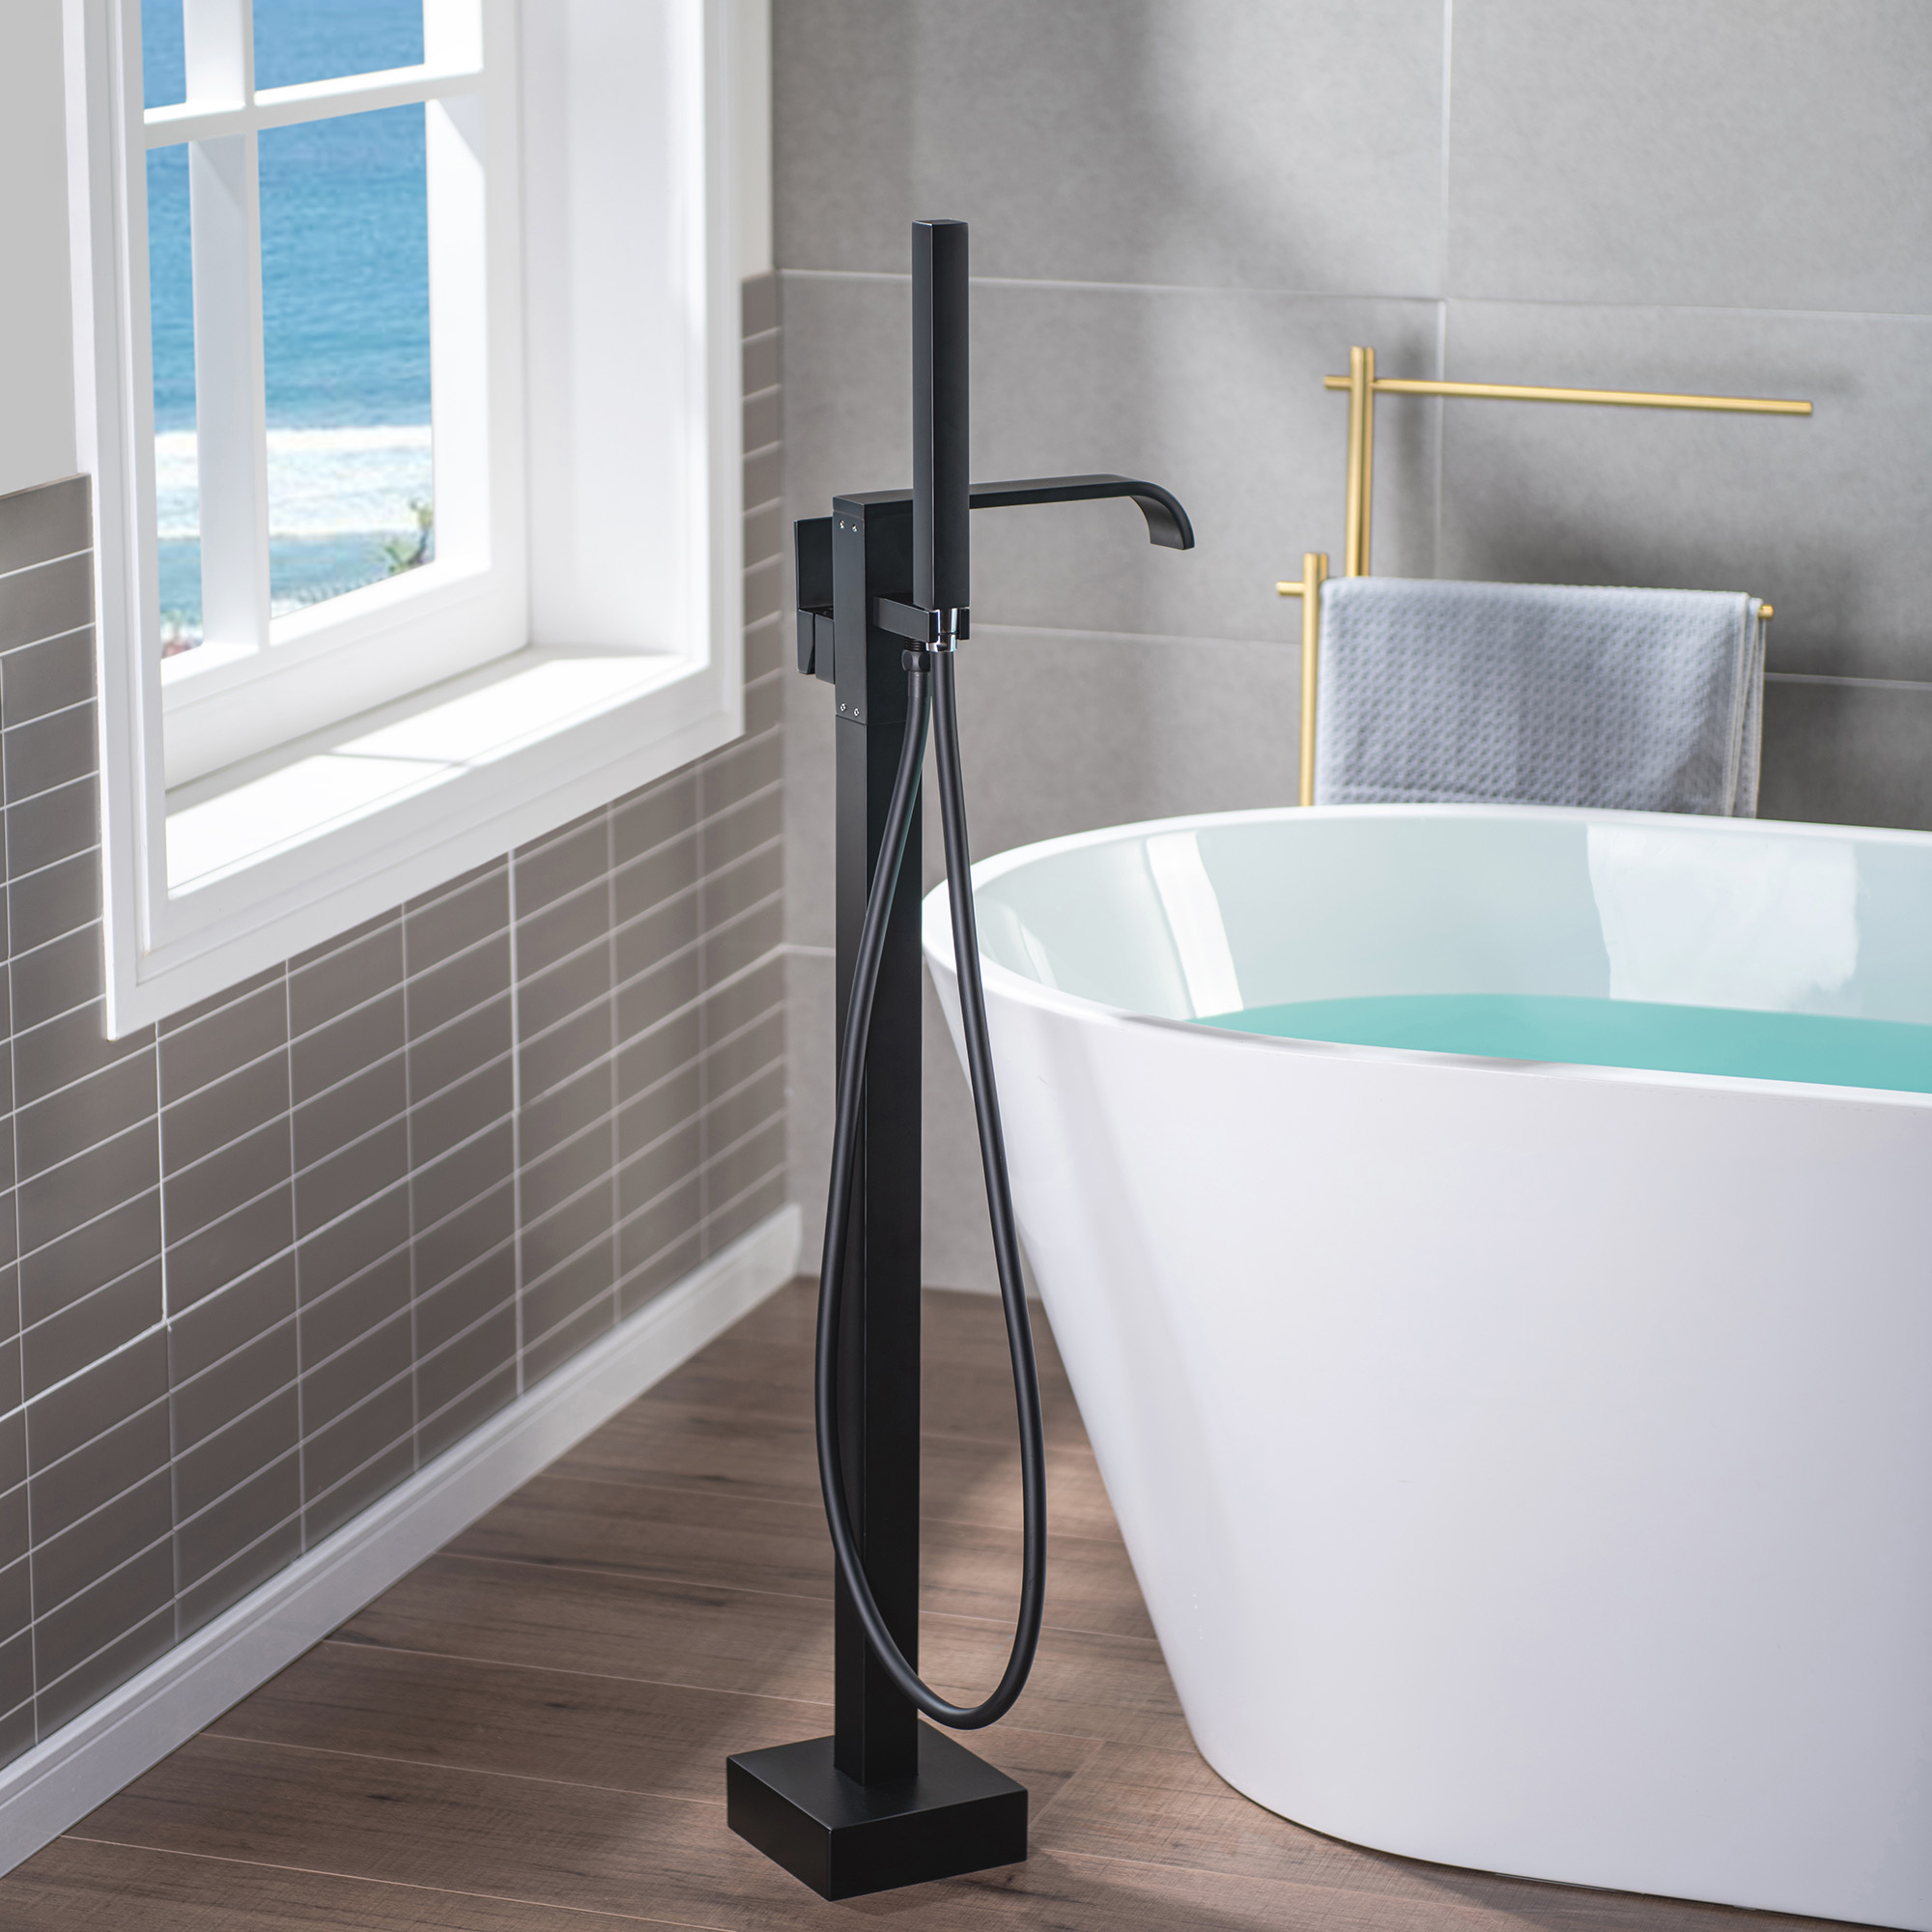  WOODBRIDGE F0037MB Contemporary Single Handle Floor Mount Freestanding Tub Filler Faucet with Hand shower in Matte Black Finish._12242